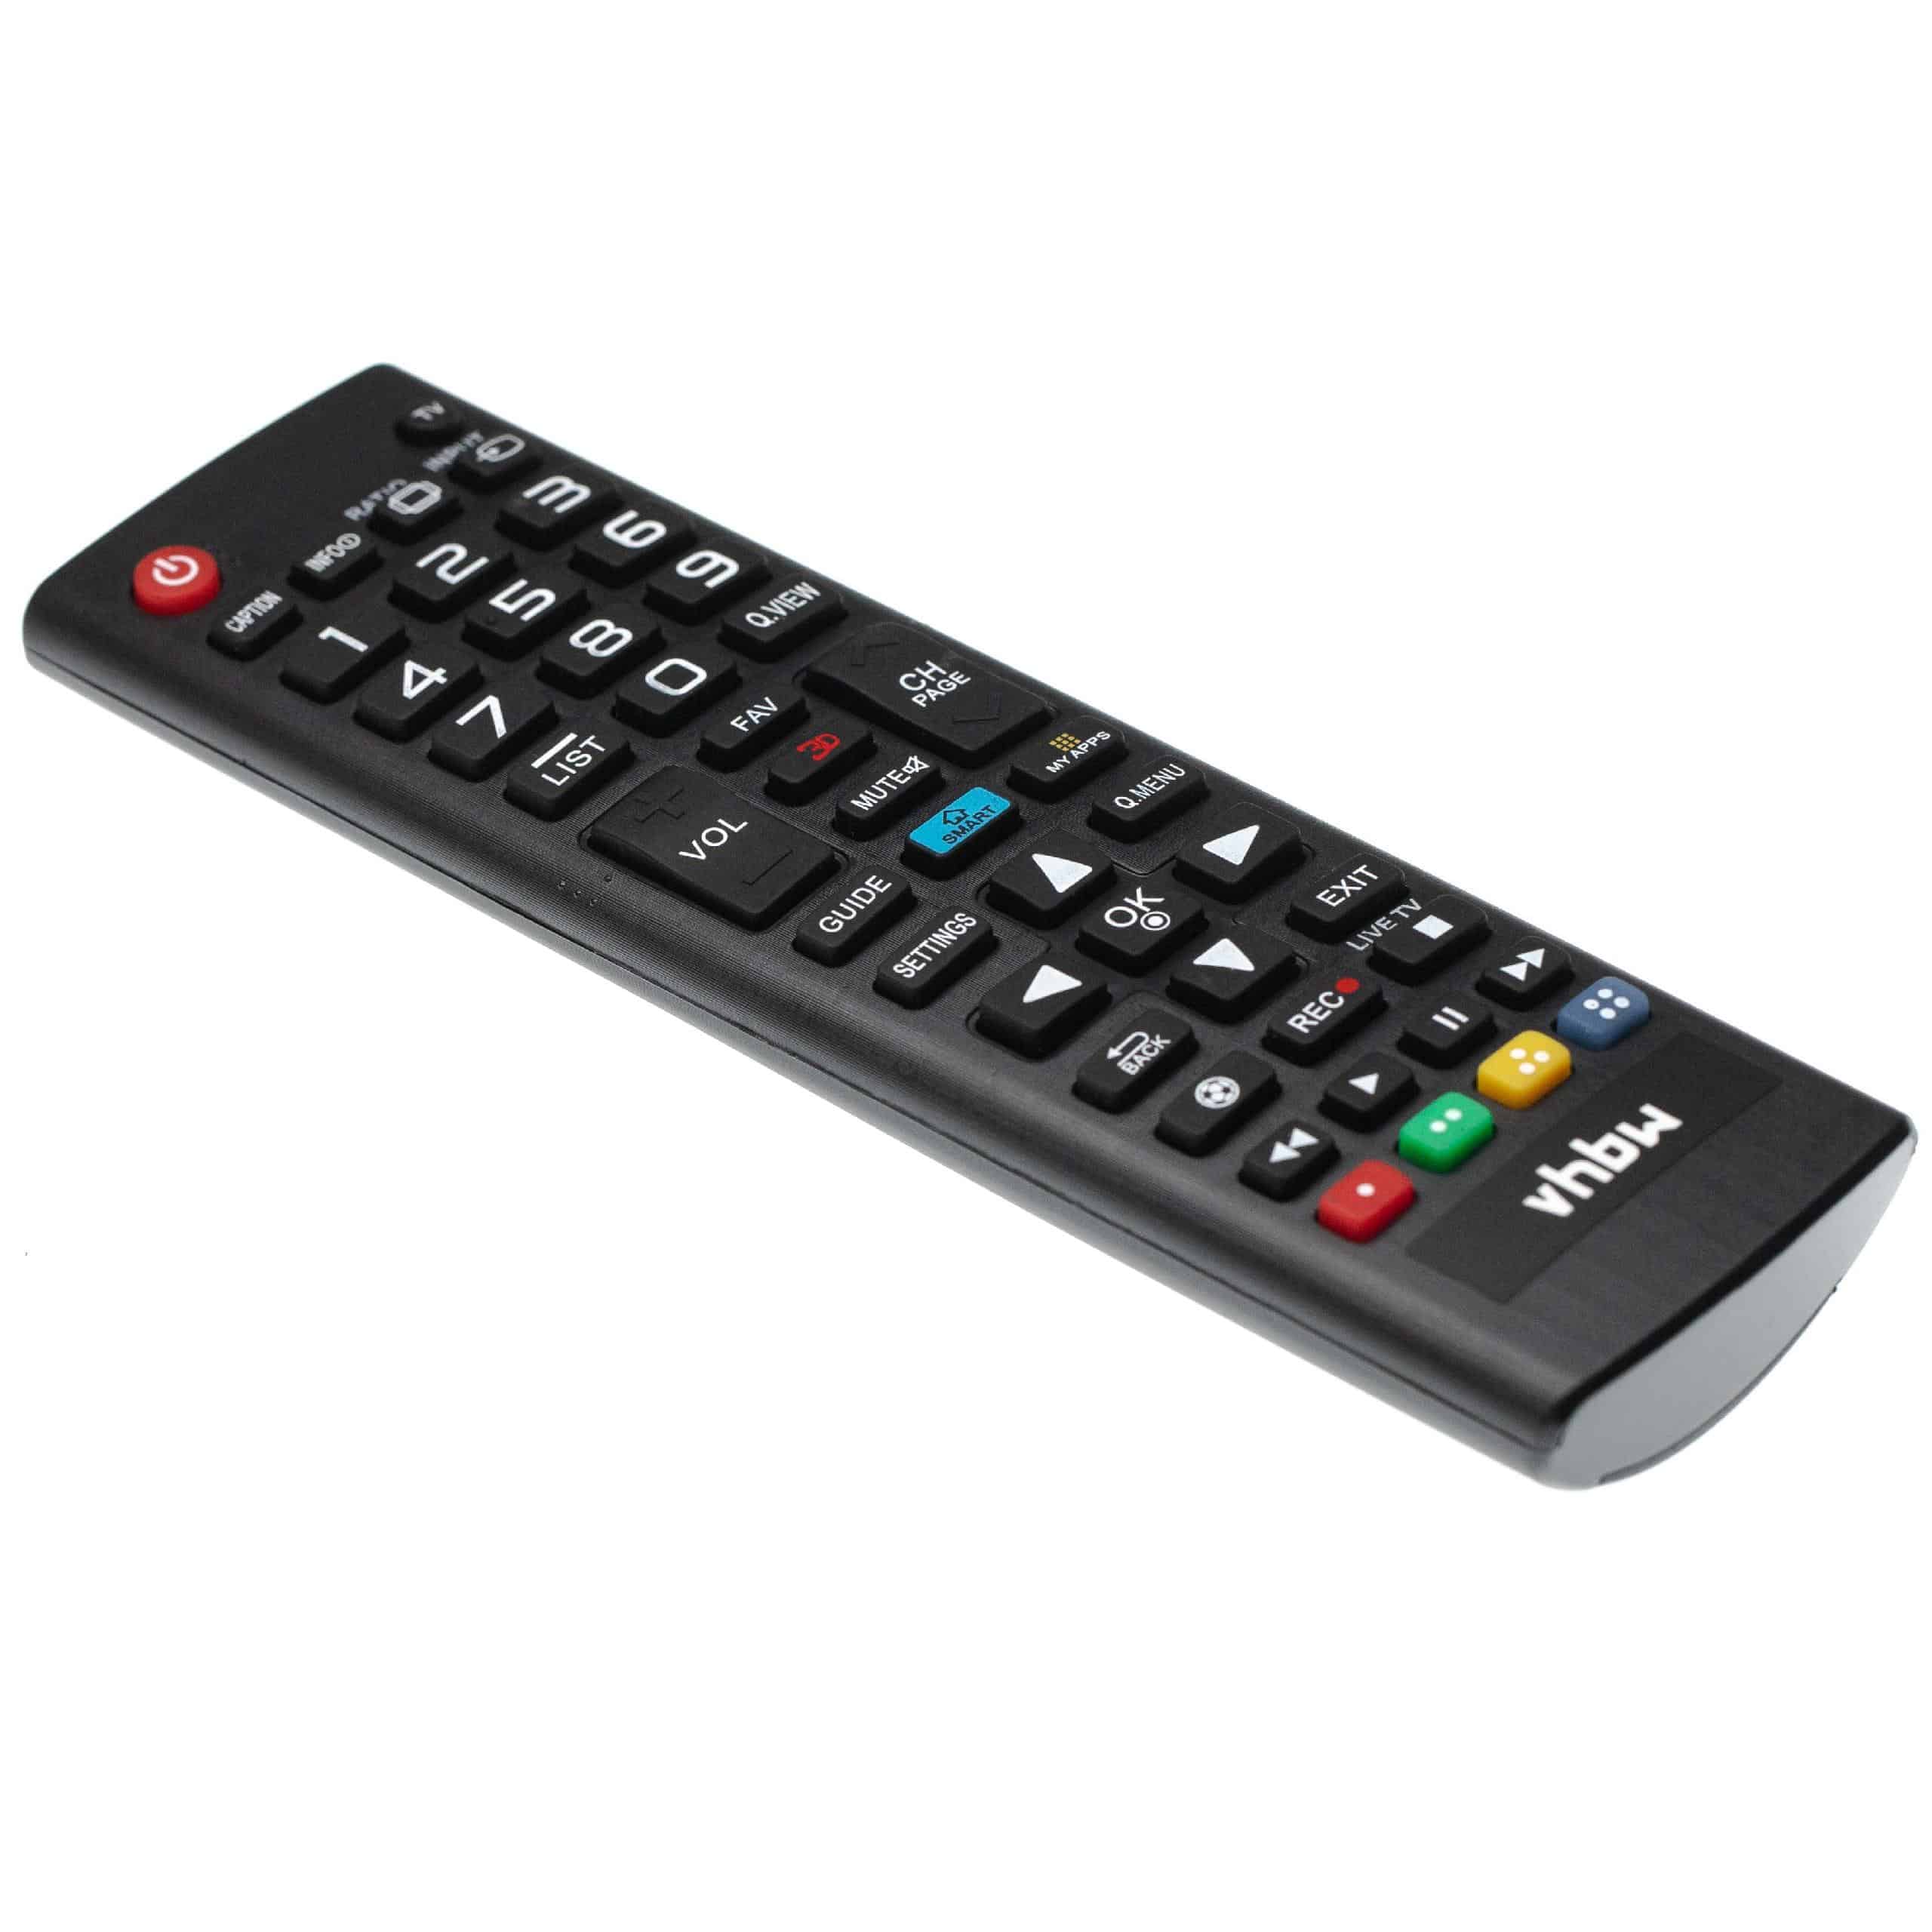 Remote Control replaces LG AKB73975702 for LG TV